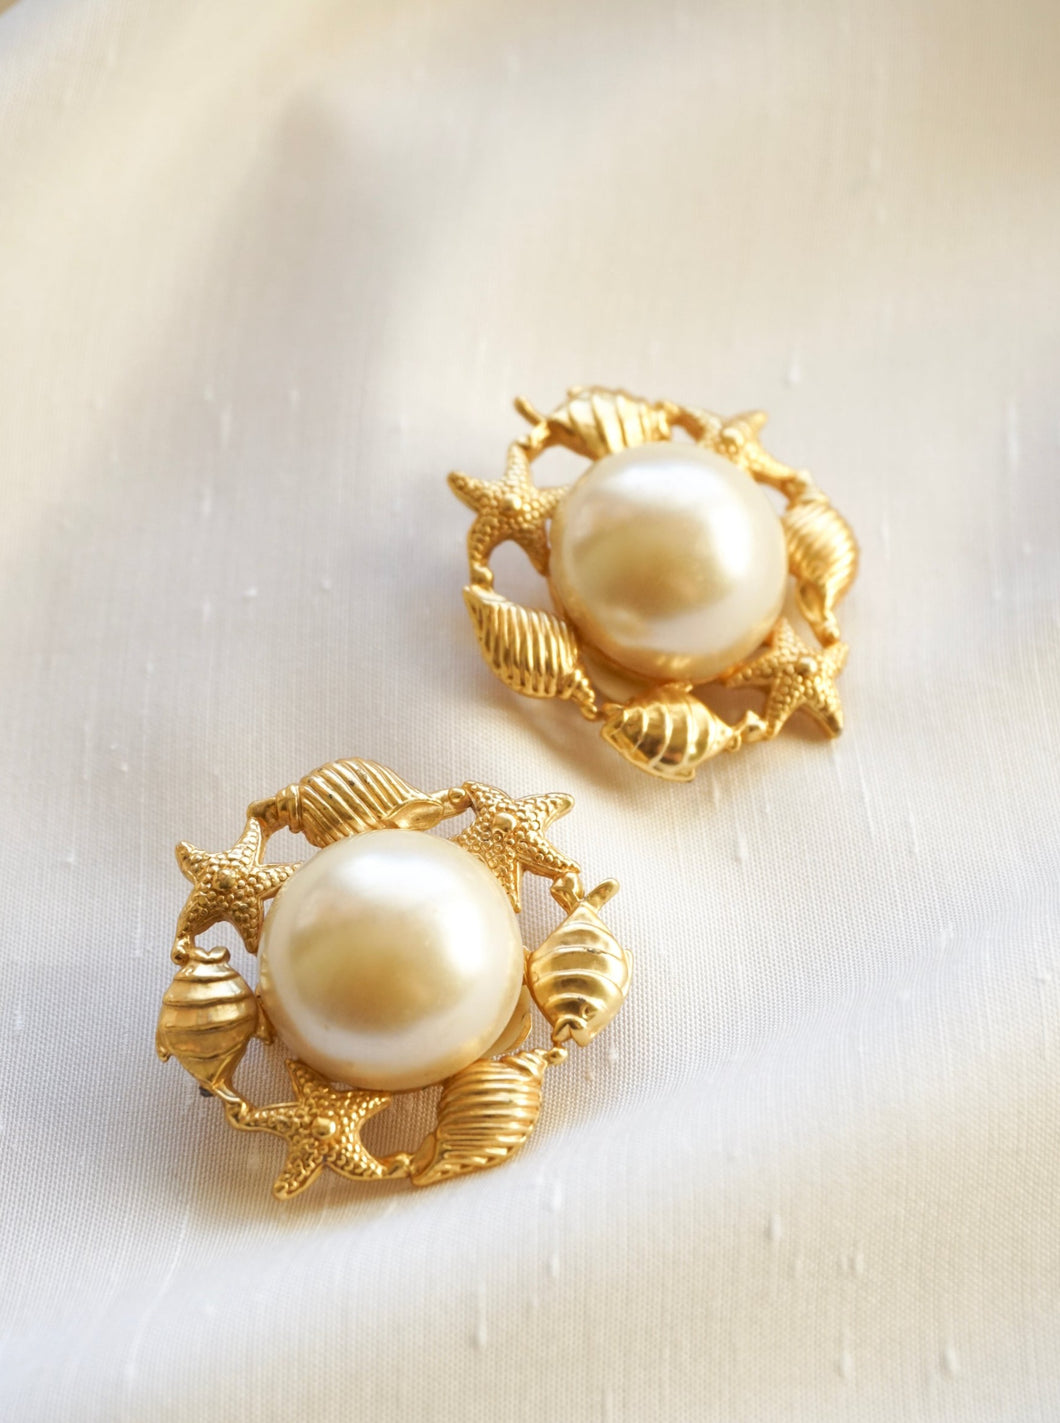 Pearl clips and golden shells